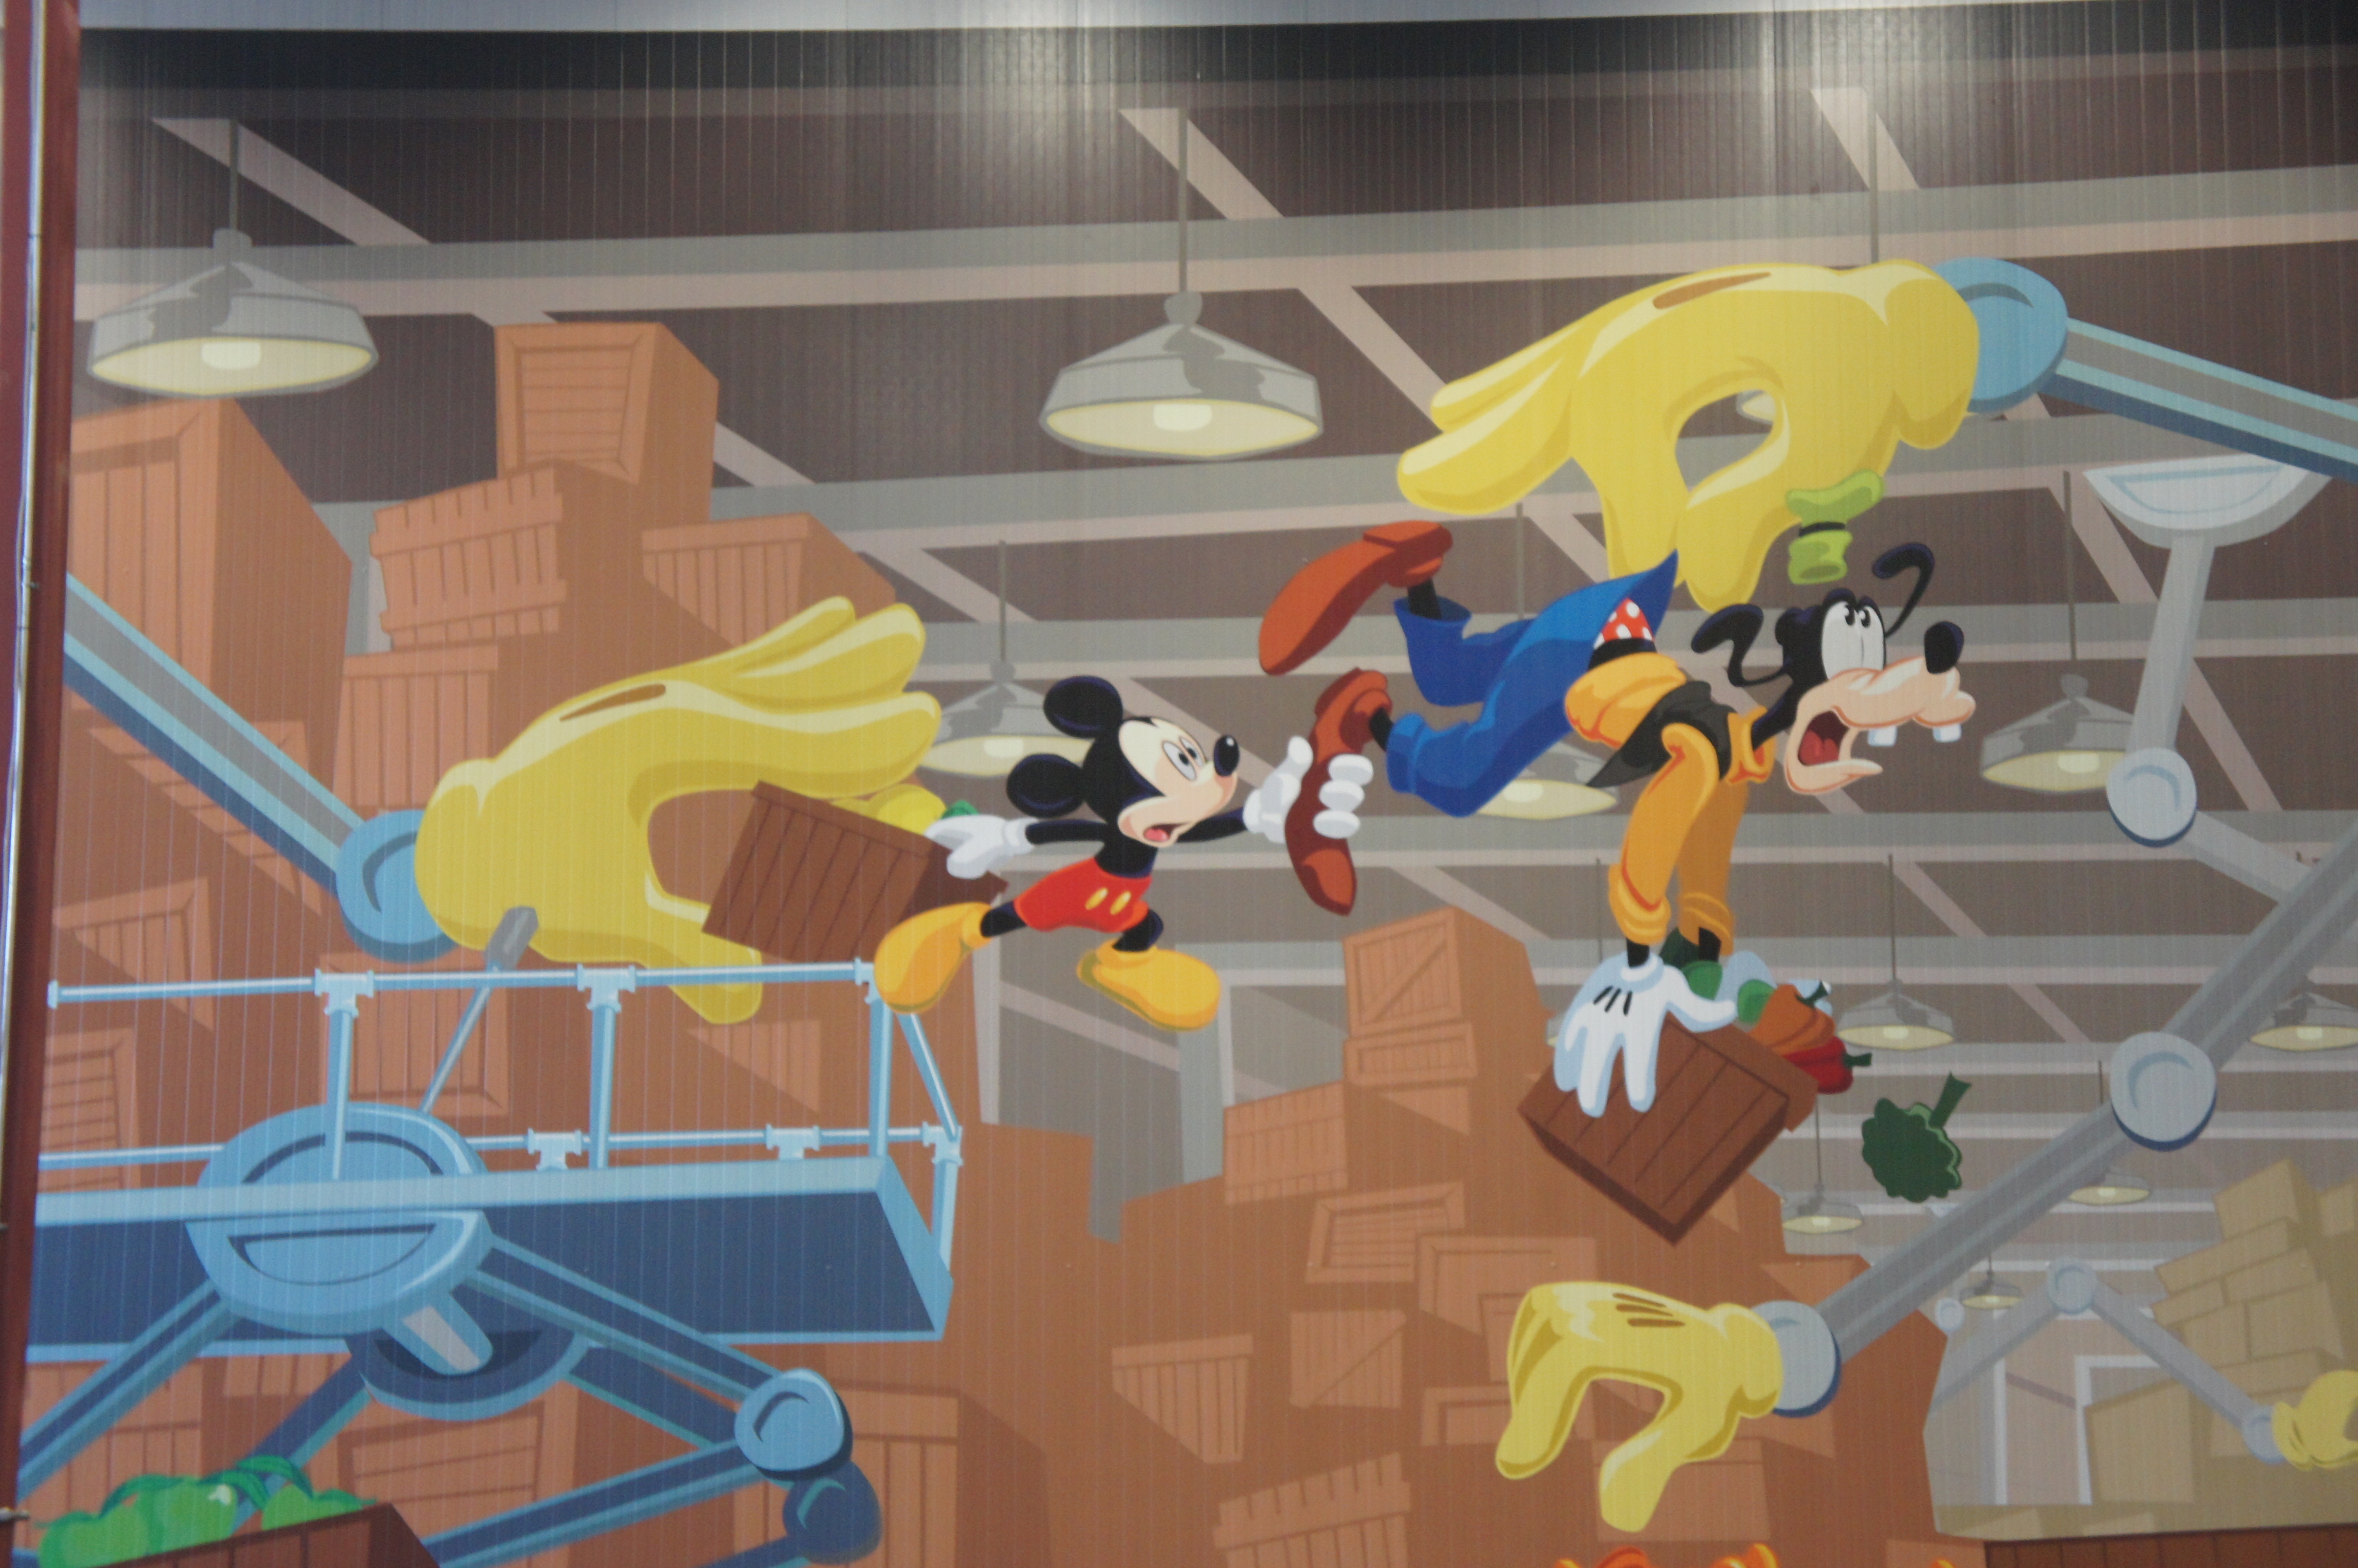 Disney Imagineers paint this scene w Mickey and Goofy at Second Harvest Food Bank